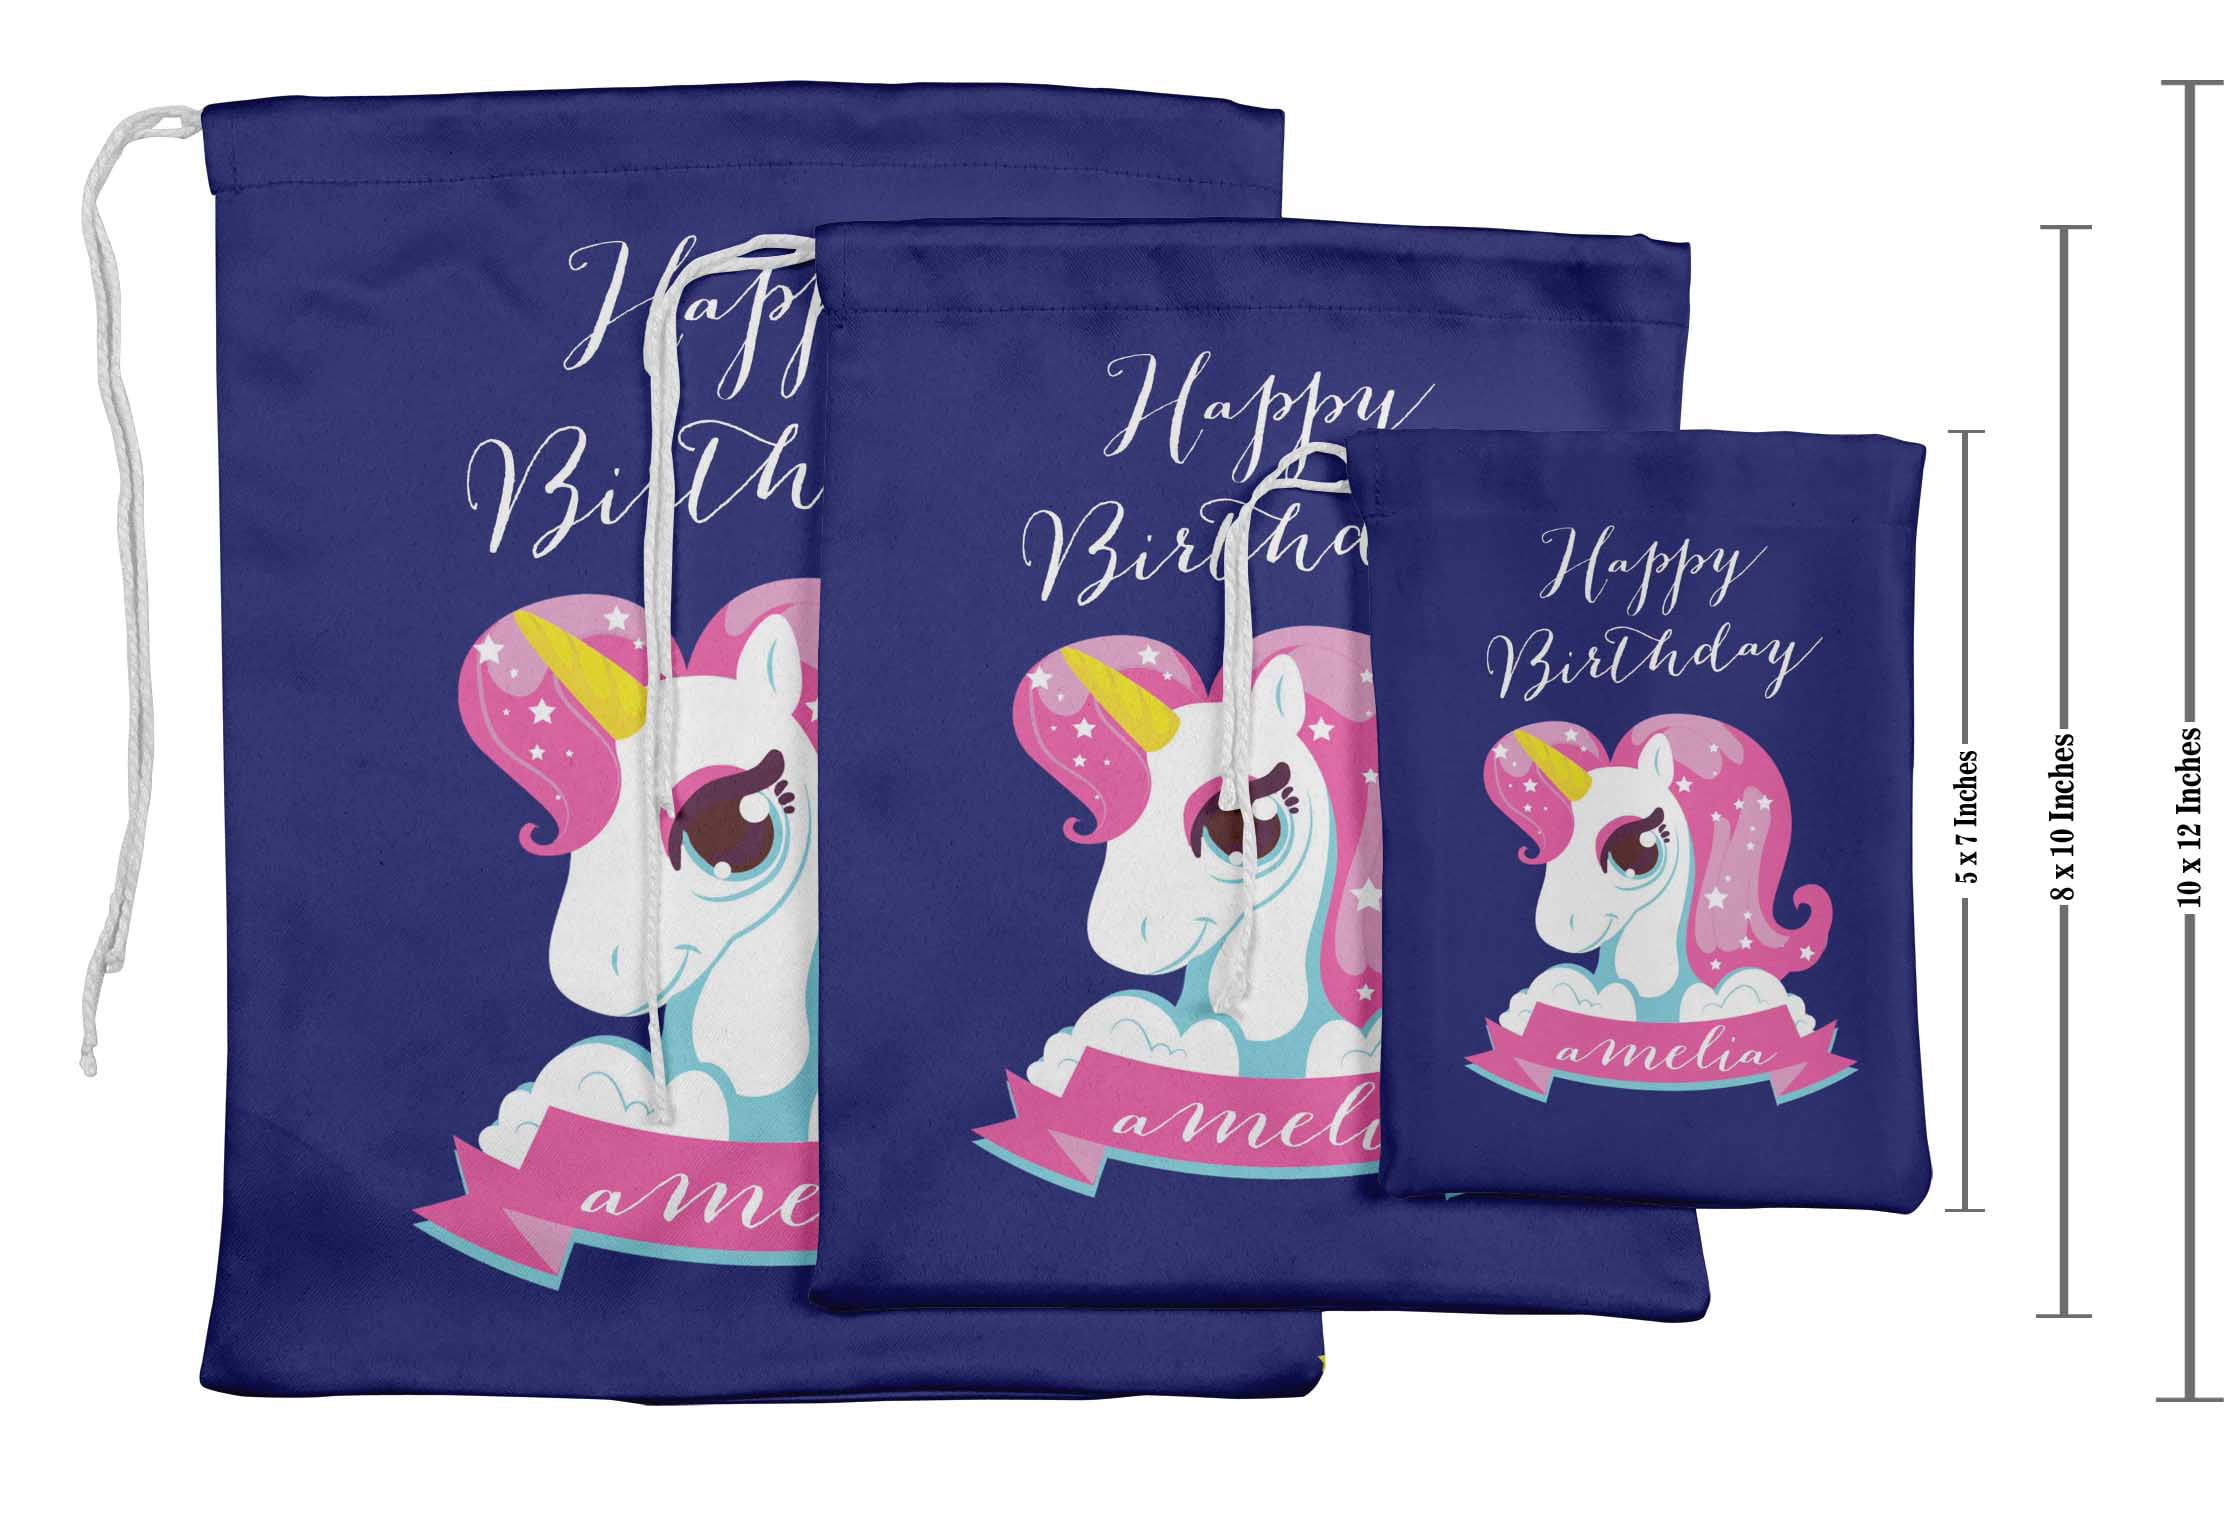 Details about   Candies Bag Set Self-adhesive Packaging Gift Bags For Party Needs Souvenir 50pcs 